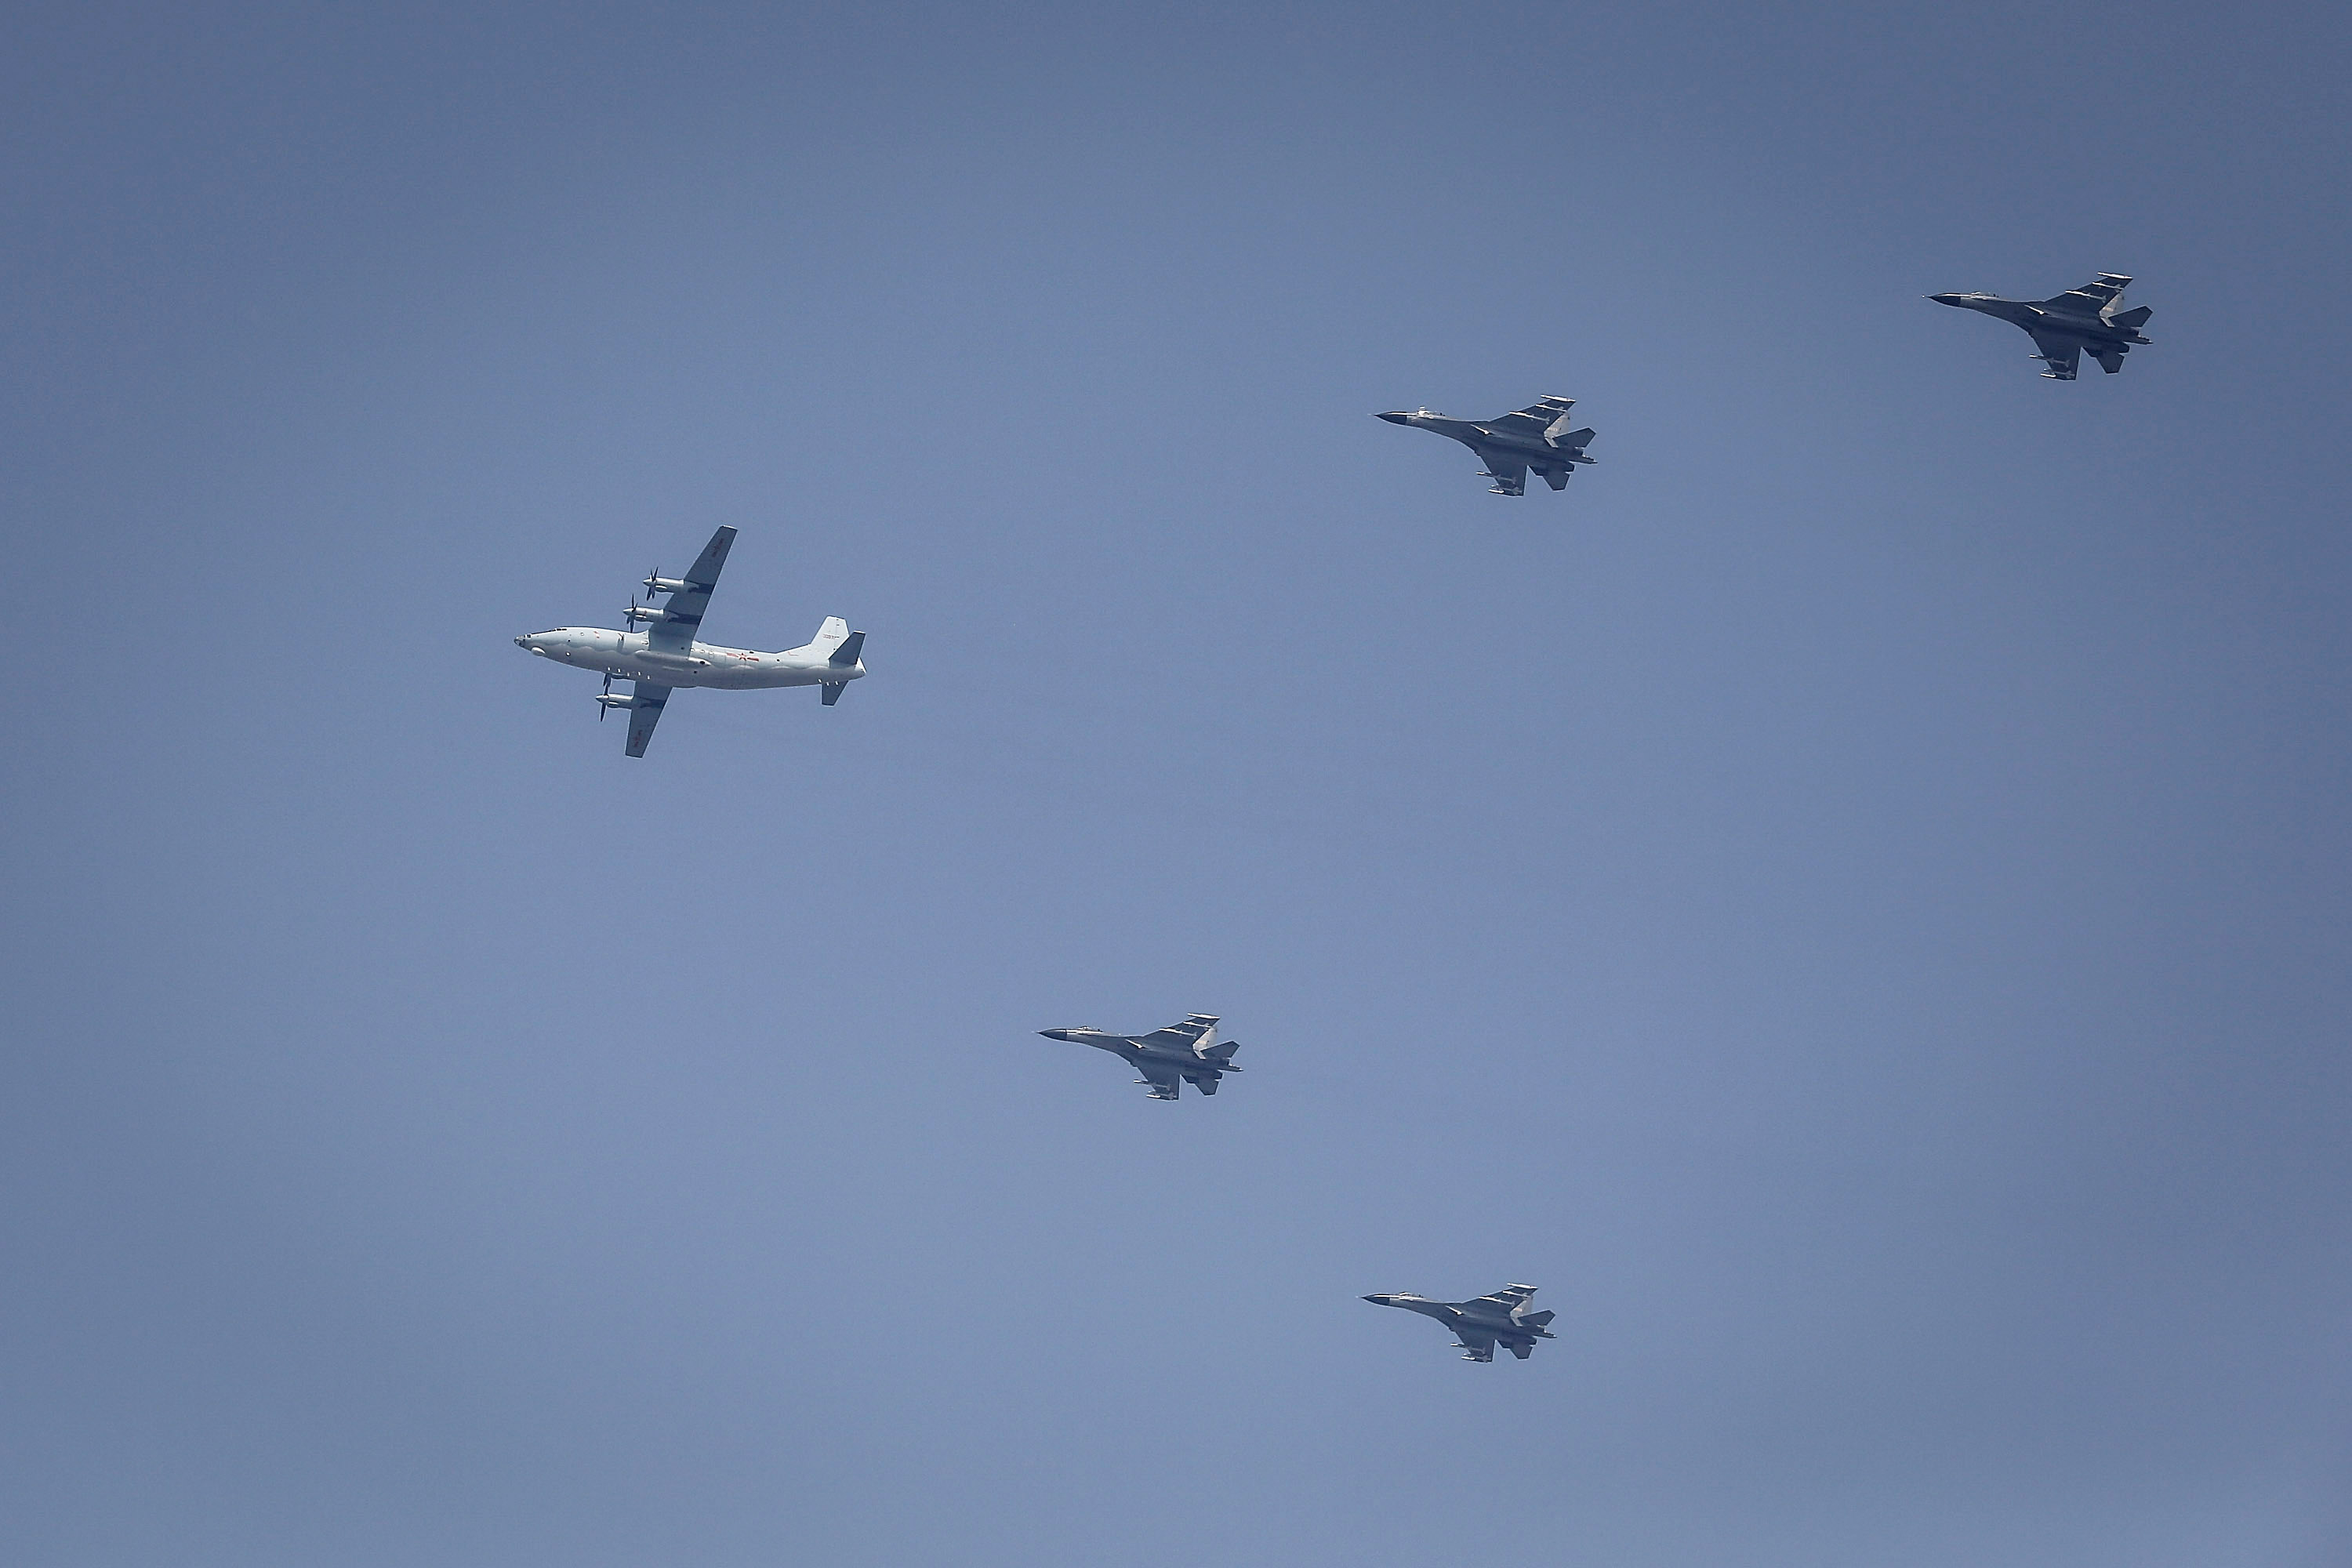 chinese-aircraft-fly-over-beijing-during-parade.jpg